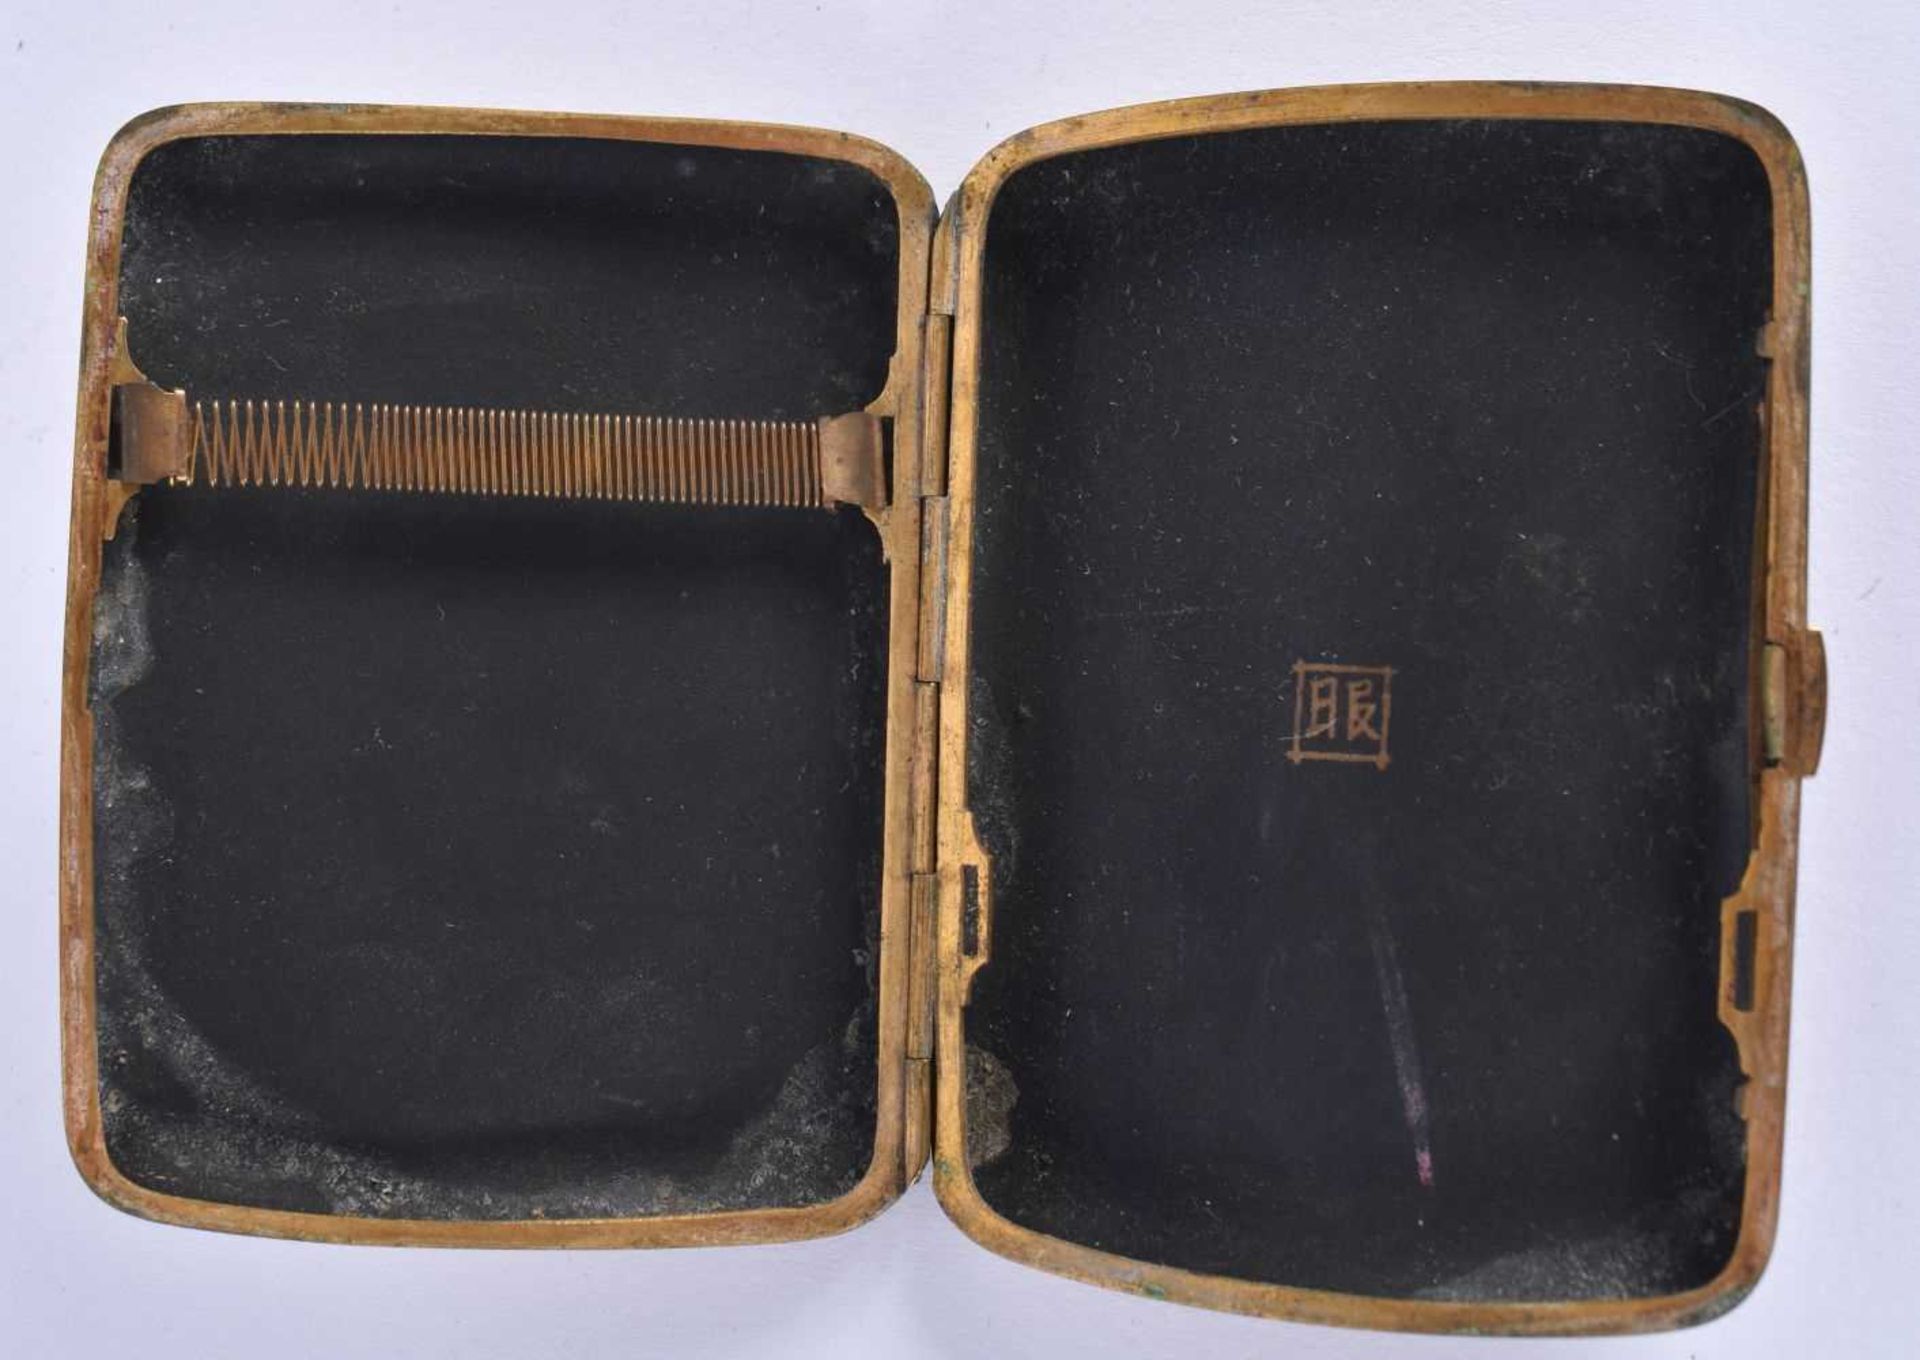 A 19TH CENTURY JAPANESE MEIJI PERIOD KOMAI STYLE DAMASCENED CIGARETTE CASE decorated with dragons - Image 2 of 3